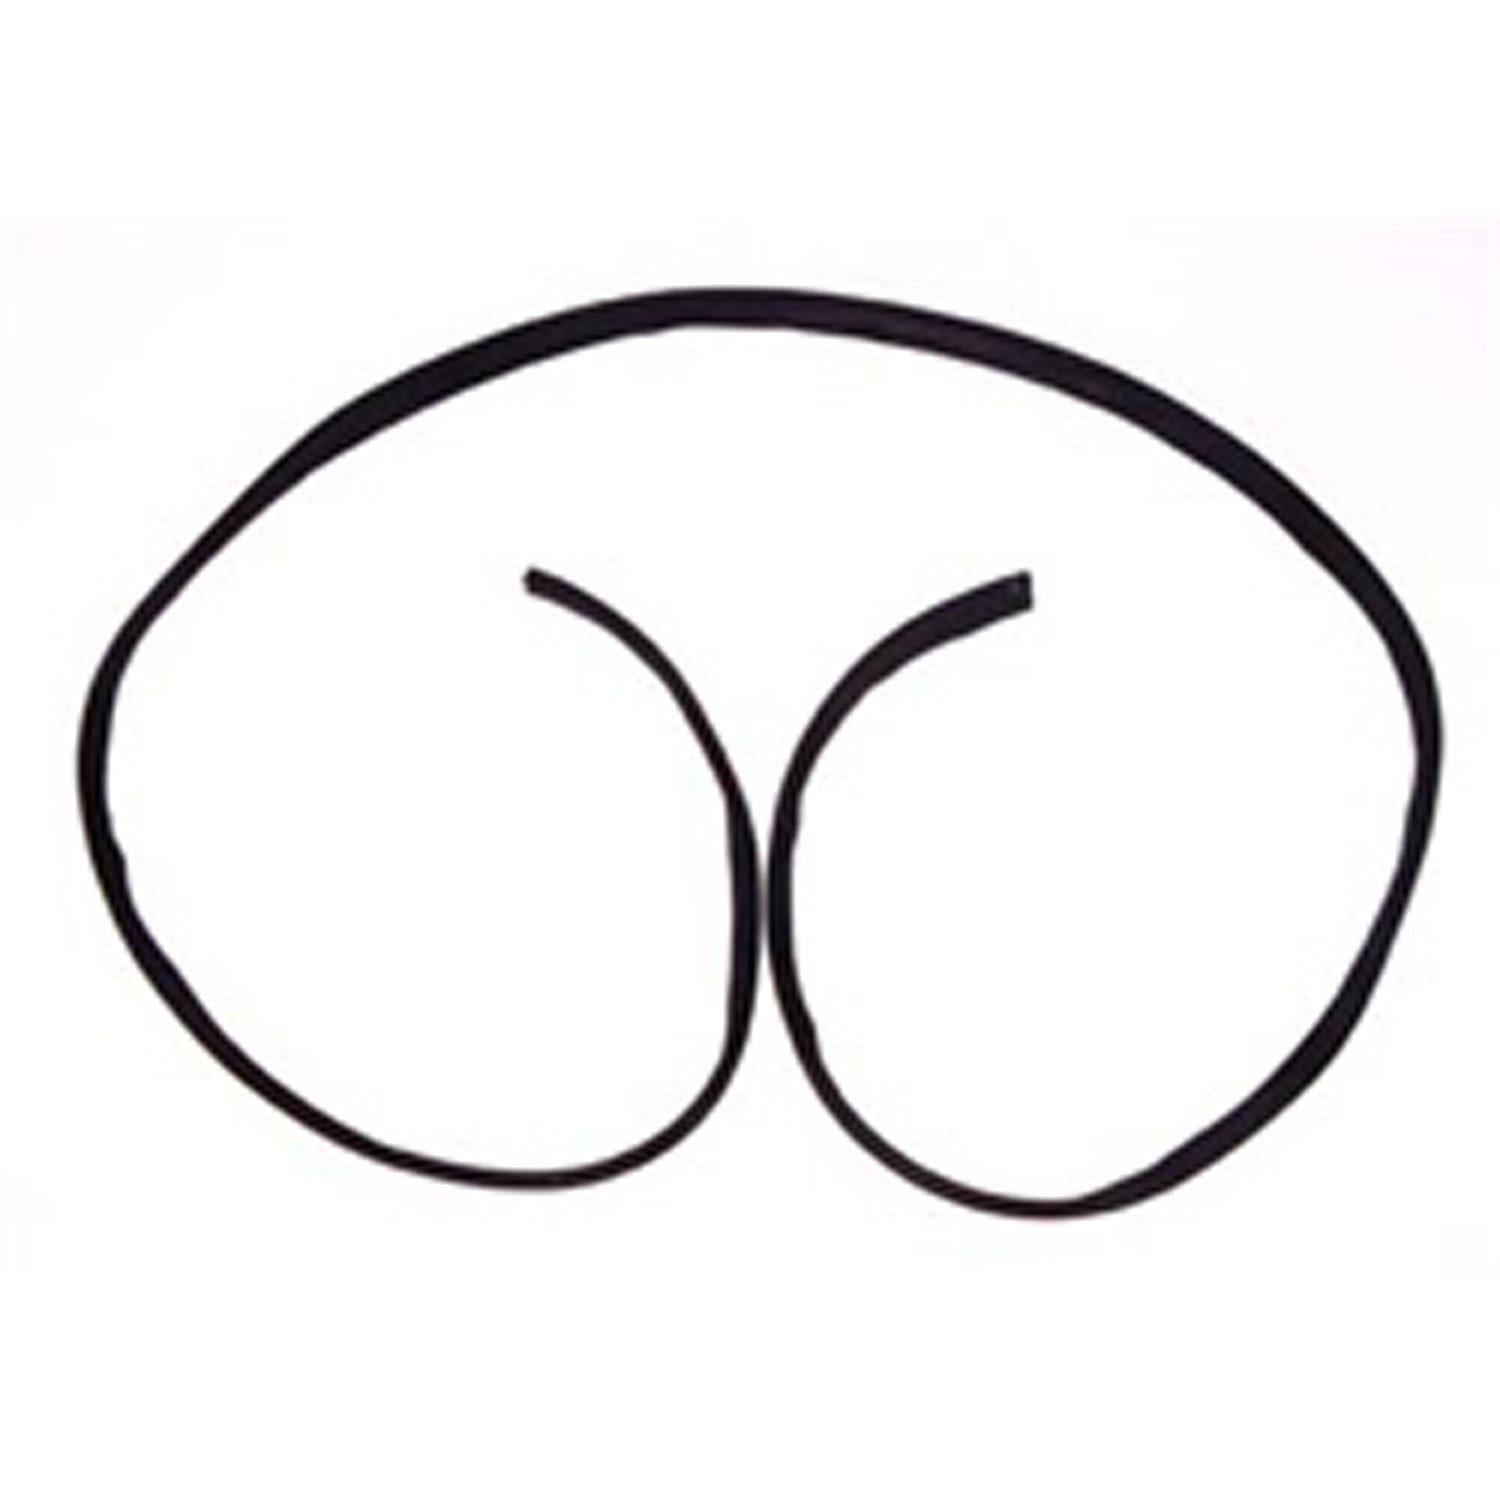 This windshield frame seal from Omix-ADA fits 41-45 Willys MB 41-45 Ford GPW and 46-49 Willys CJ2A.